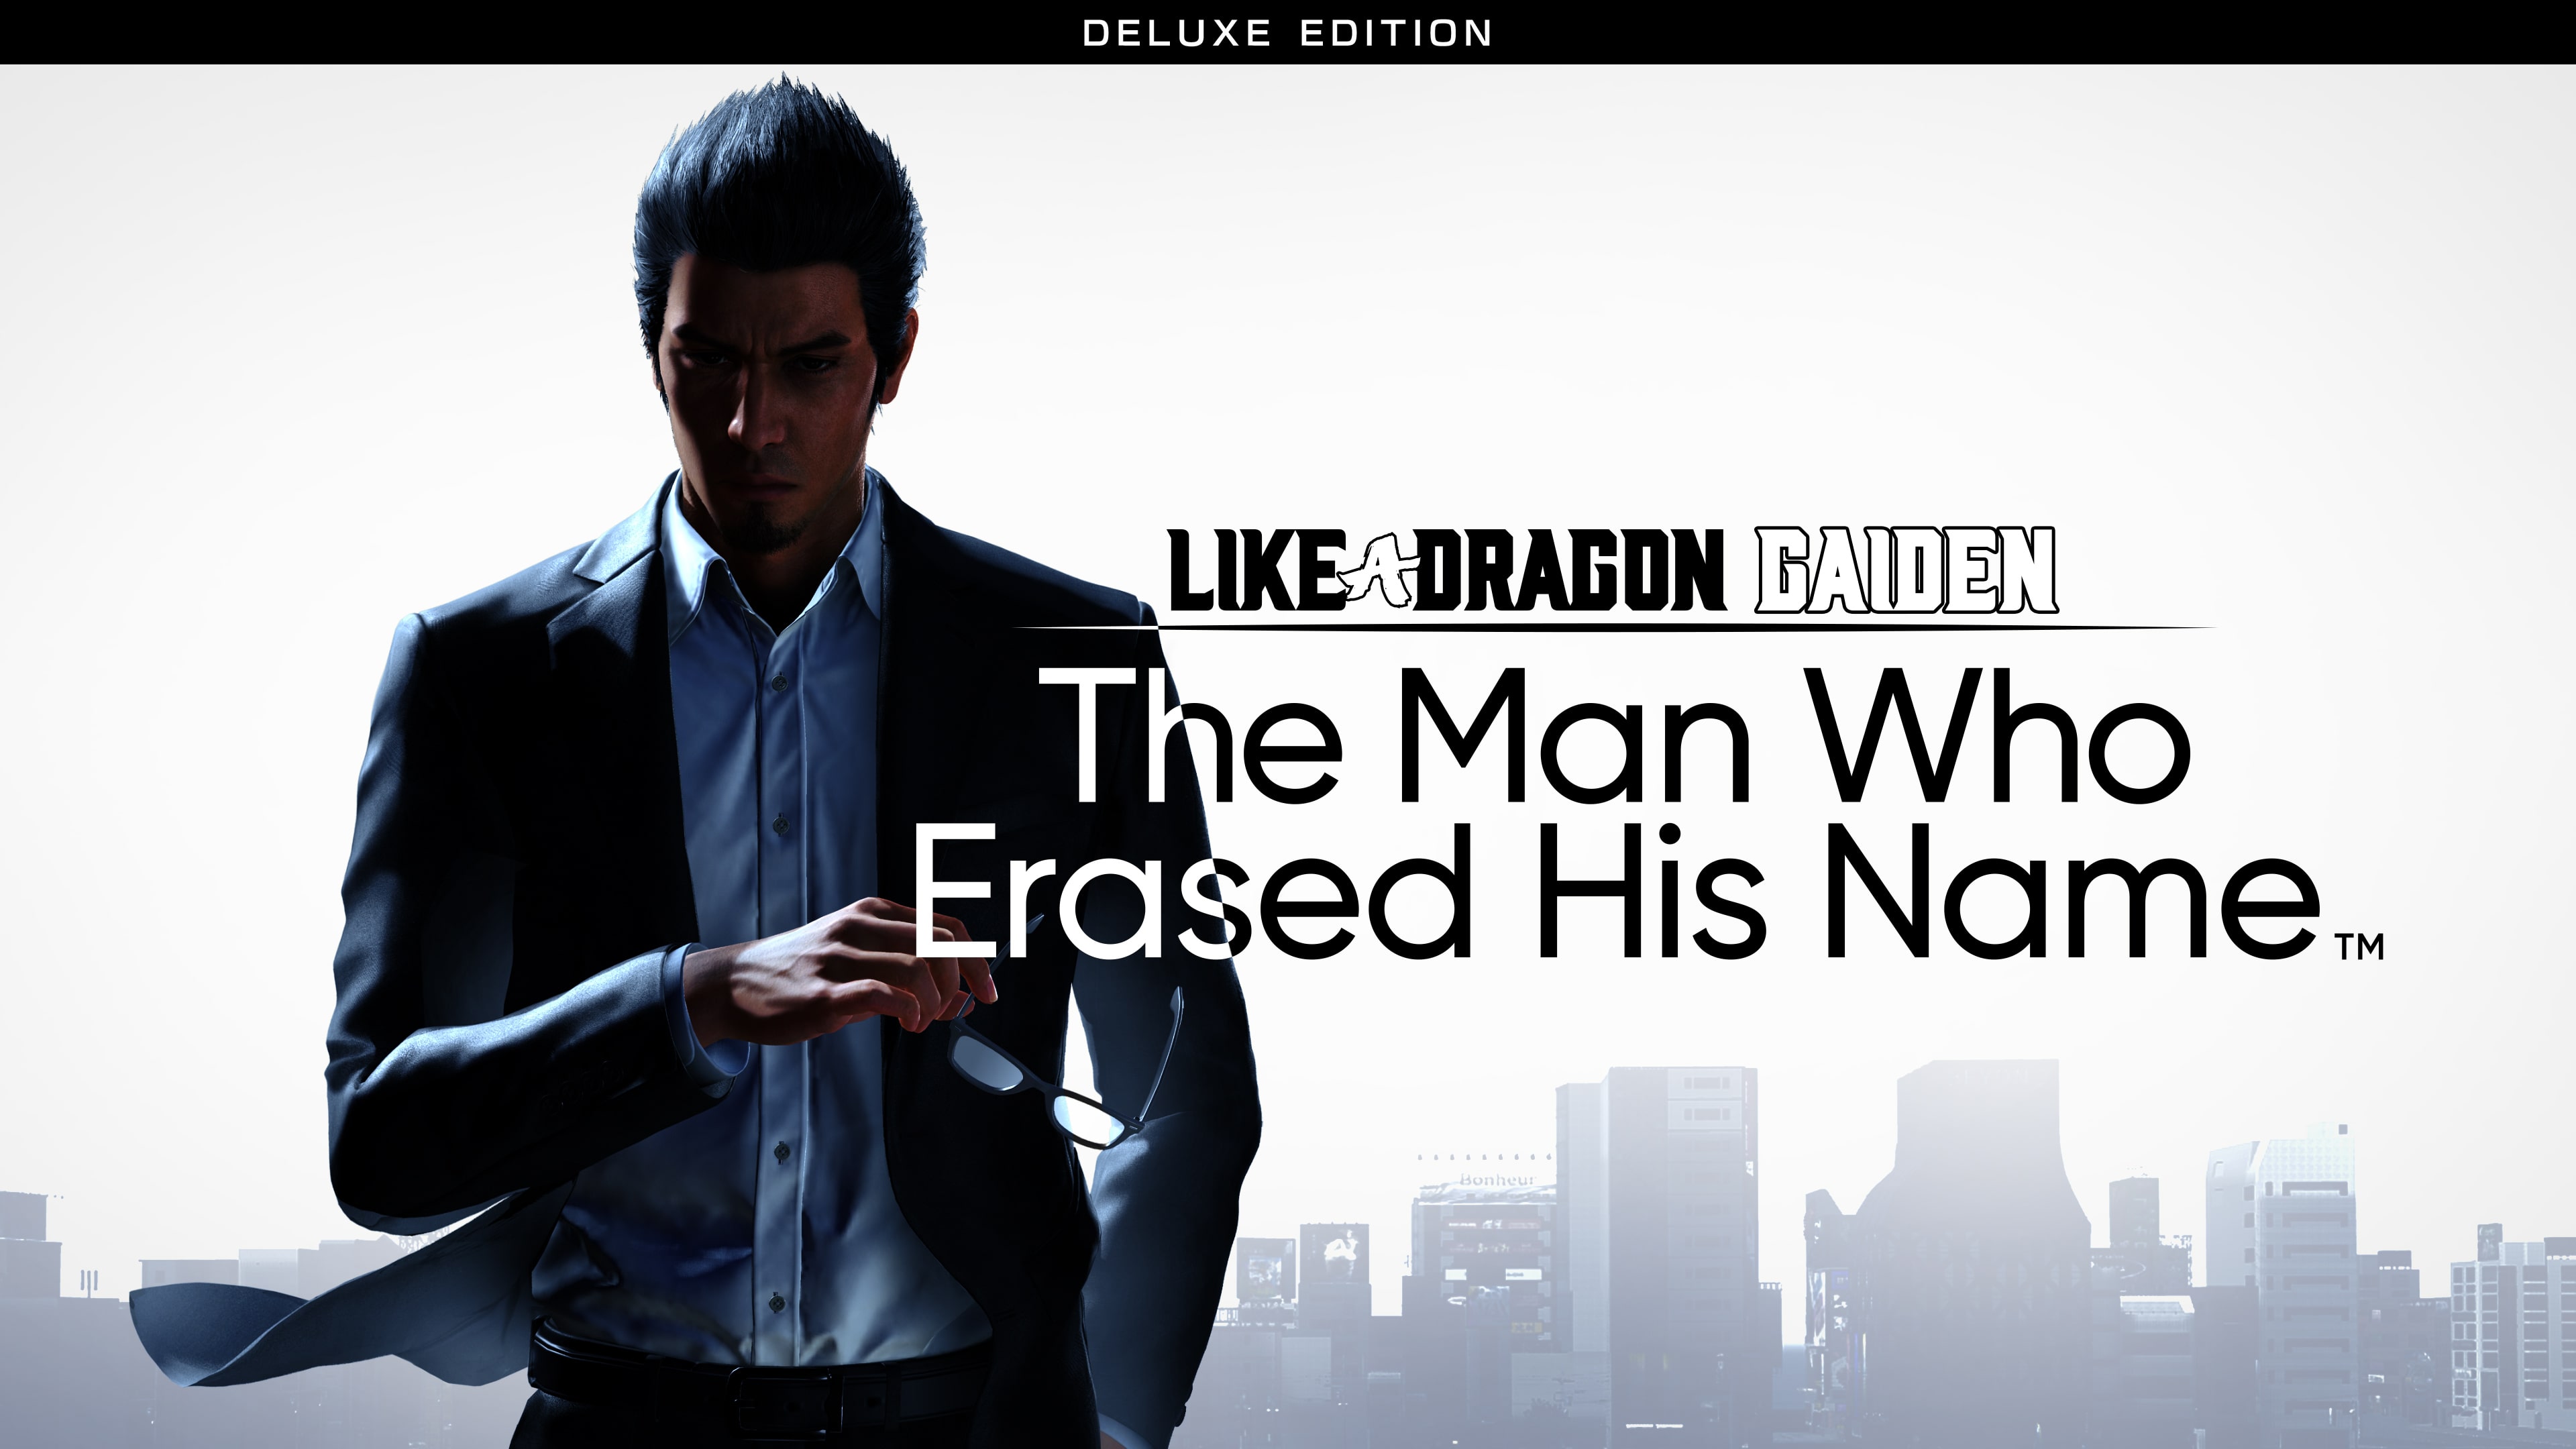 Like a Dragon Gaiden: The Man Who Erased His Name Deluxe Edition PS4 & PS5 (Simplified Chinese, English, Korean, Japanese, Traditional Chinese)